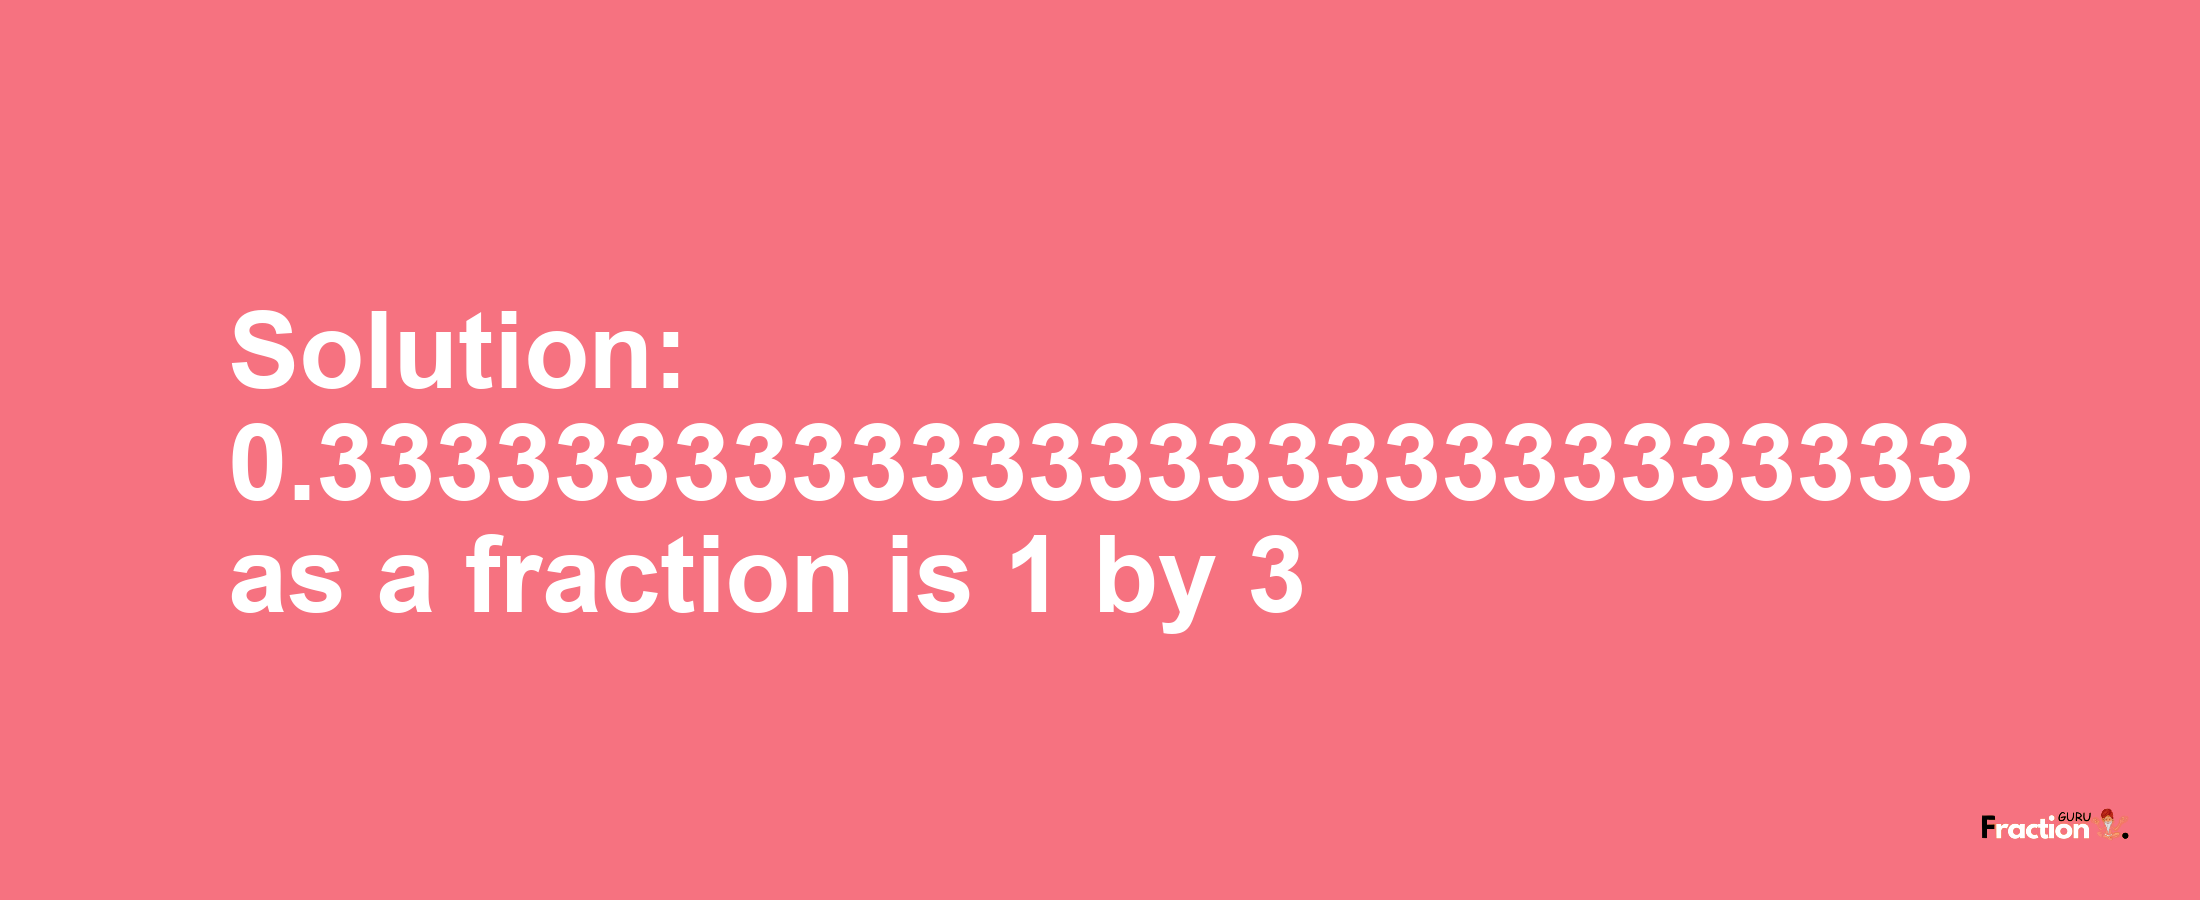 Solution:0.3333333333333333333333333333 as a fraction is 1/3